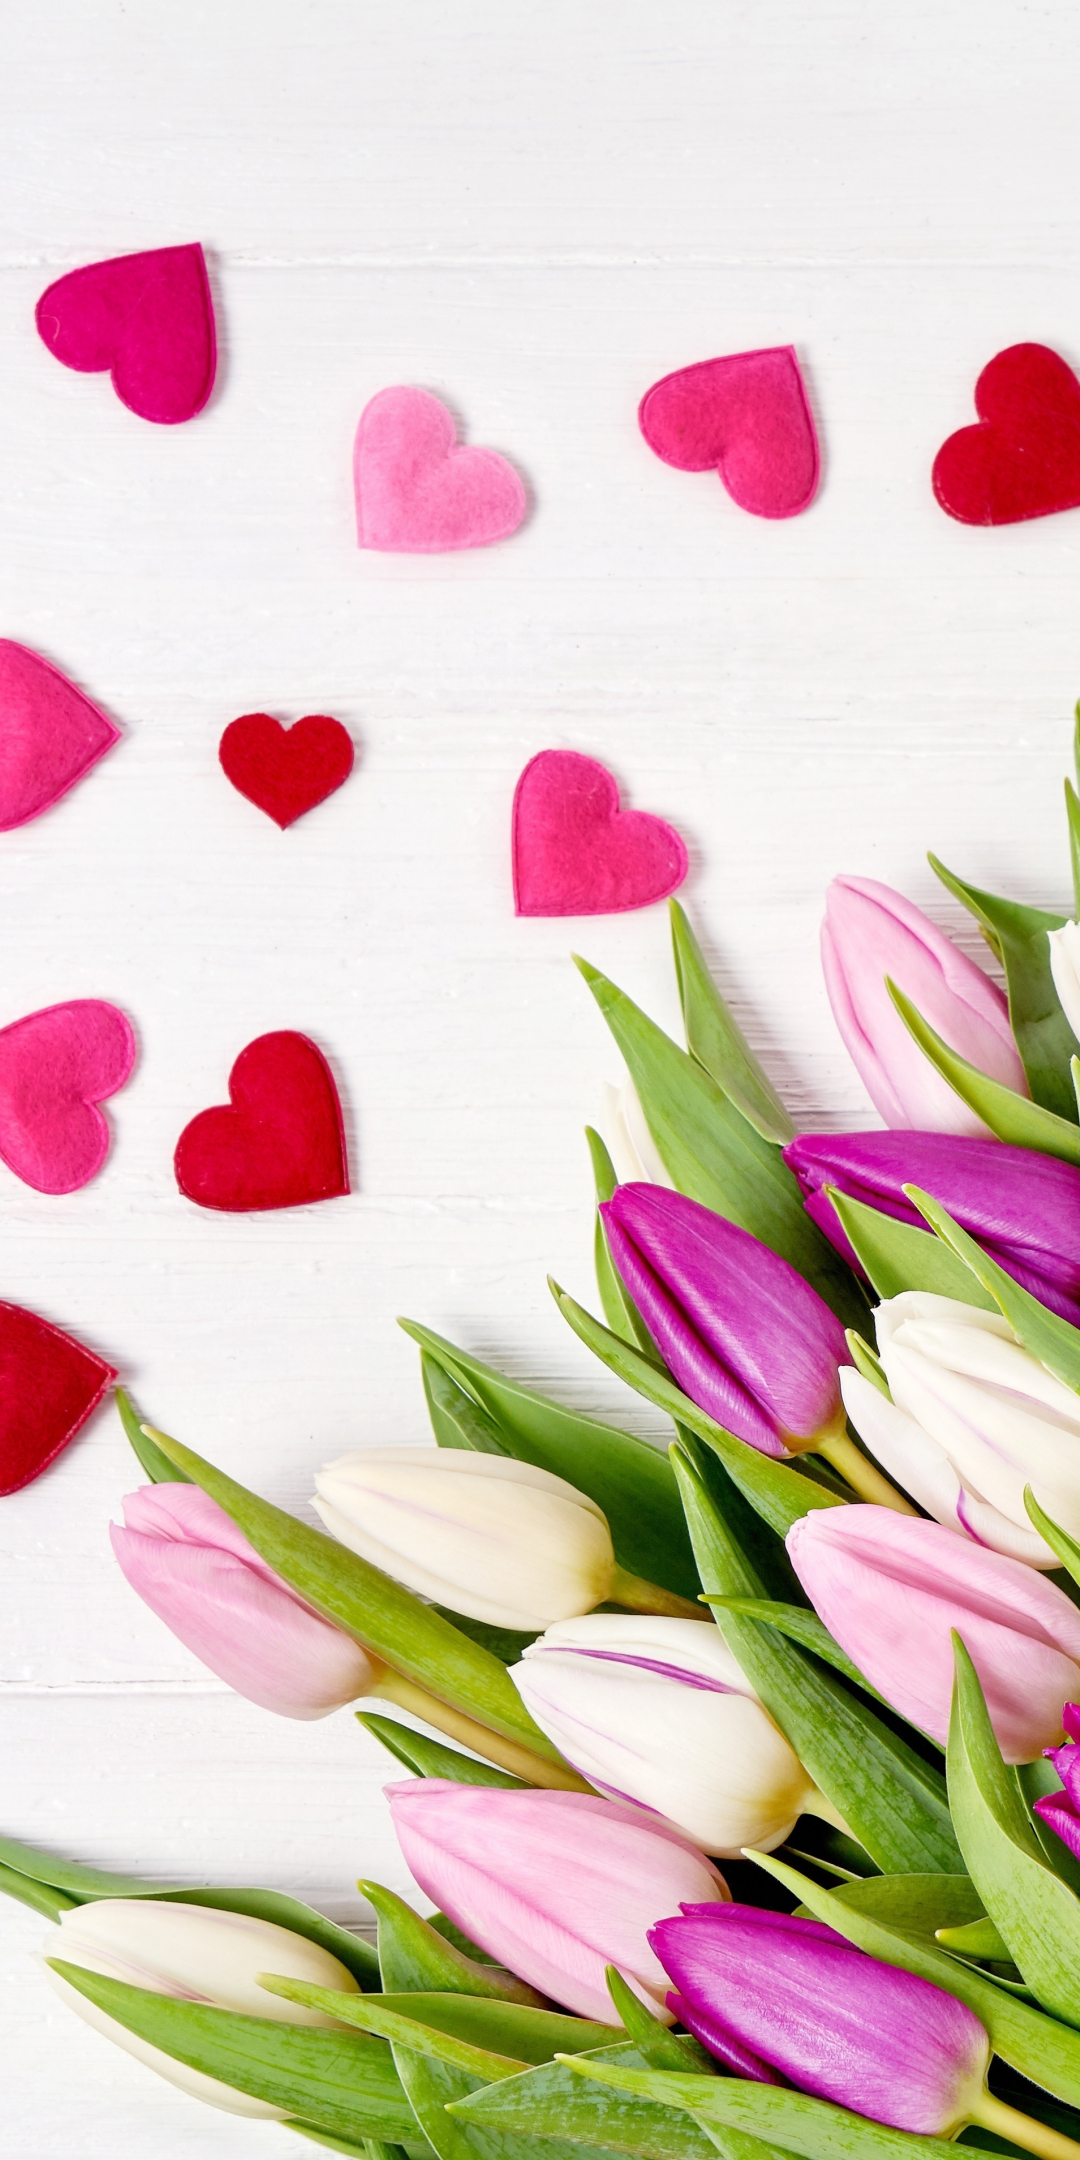 Heart, shapes, flowers, pink tulips, 1080x2160 wallpaper